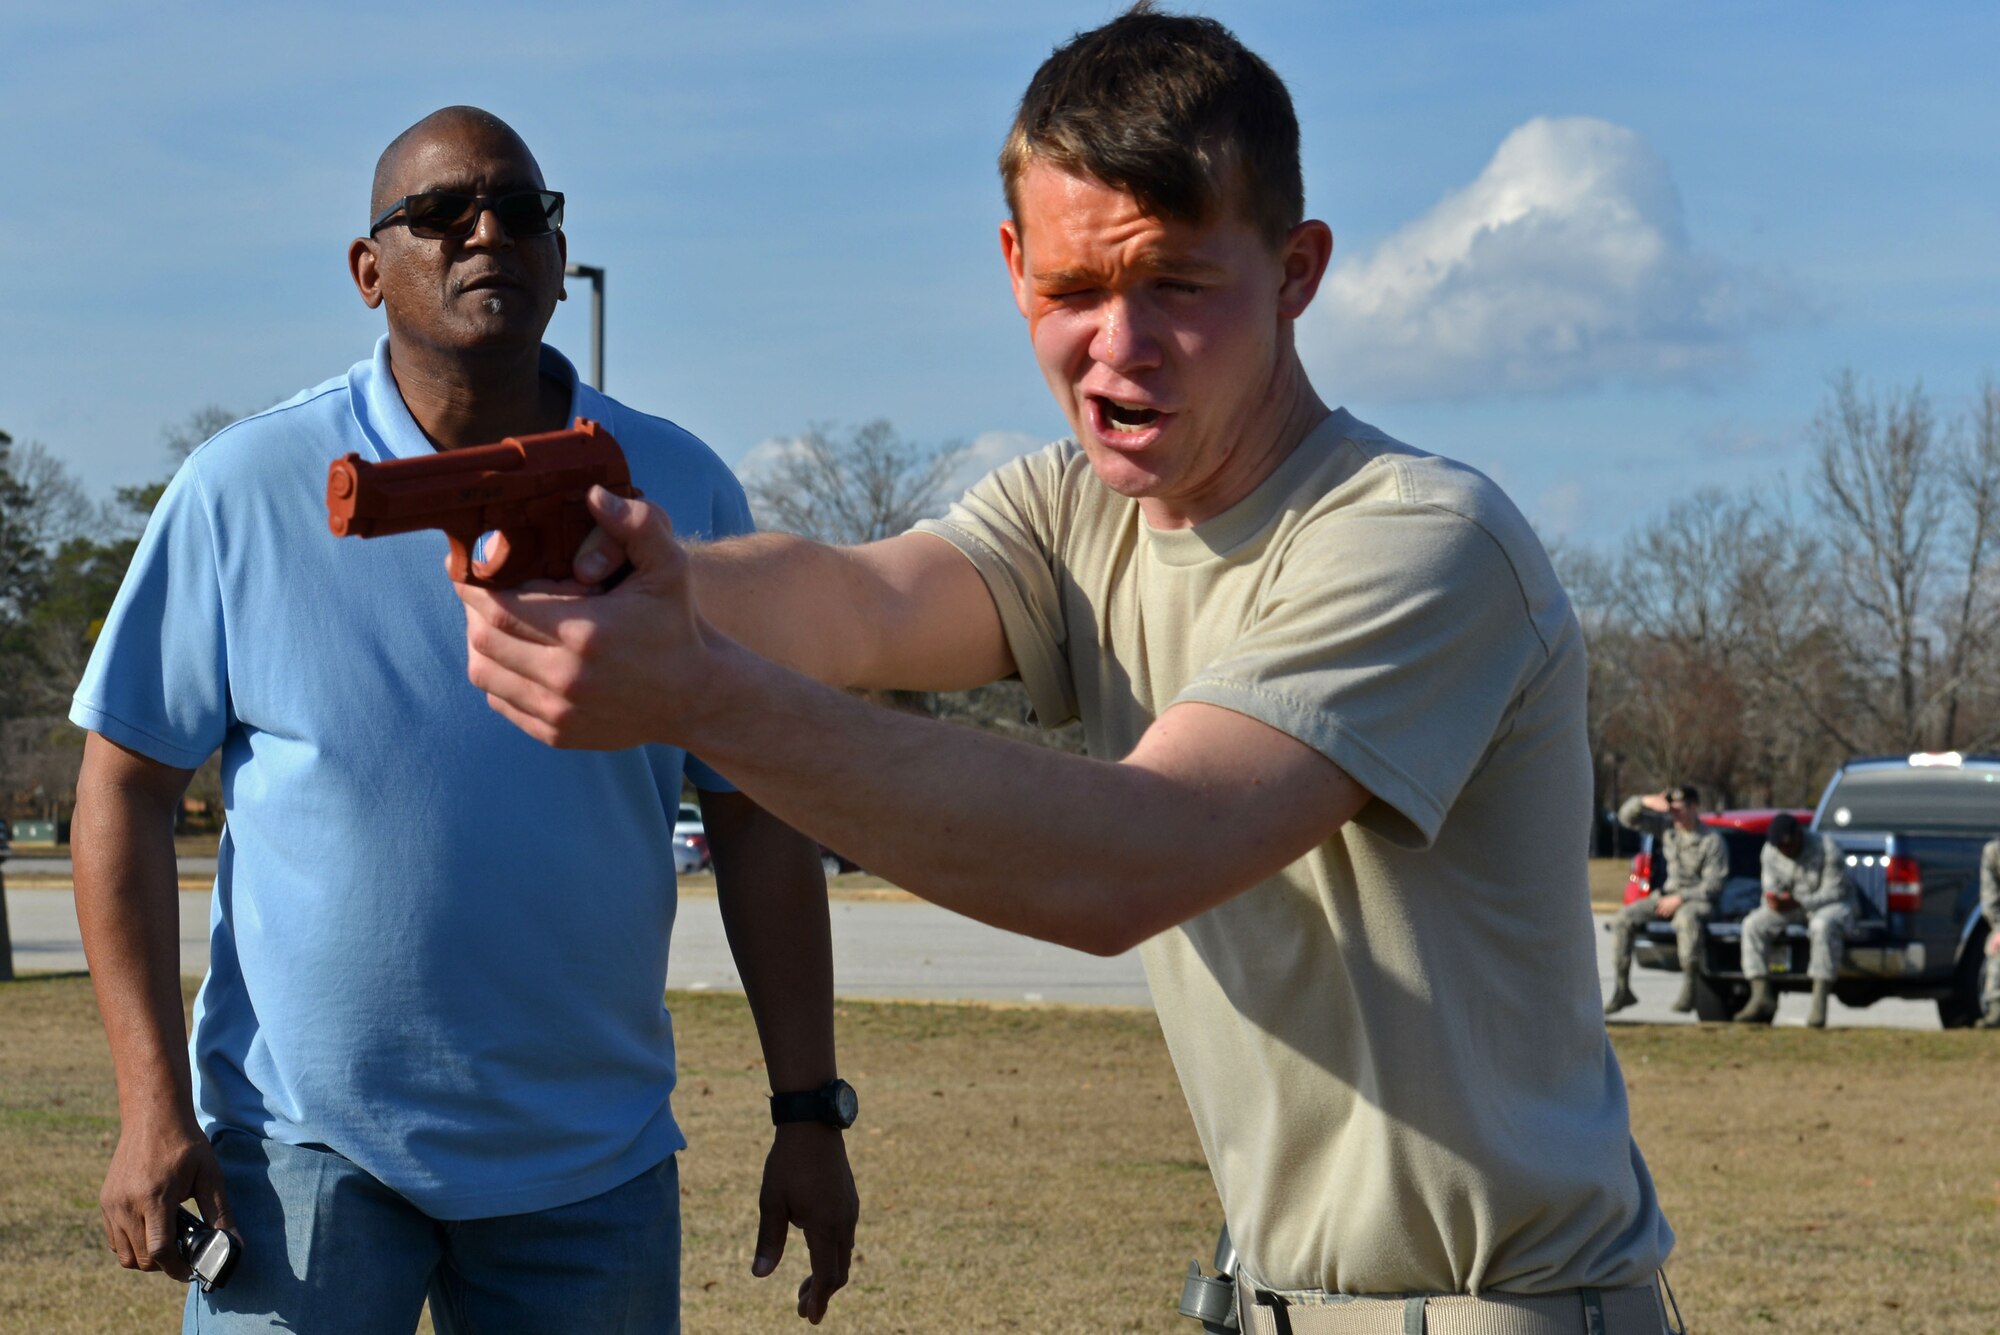 U.S. Air Force Airman 1st Class Austin Reese, 20th Security Forces Squadron entry controller, aims an artificial training weapon at a simulated attacker during his pepper spray training while Karl Johnson, 20th SFS trainer, motivates him to continue at Shaw Air Force Base, S.C., Jan. 18, 2017. During a use of force training day, Airmen reviewed less-lethal weapons, operational security and identification procedures, to include the new Real ID Act changes. Although some of the training was classroom-based, the Airmen also performed baton drills and situational use of force training. Team Shaw defenders who had not yet experienced pepper spray first-hand were required to complete an obstacle course while affected by the substance. (U.S. Air Force photo by Airman 1st Class Destinee Sweeney)